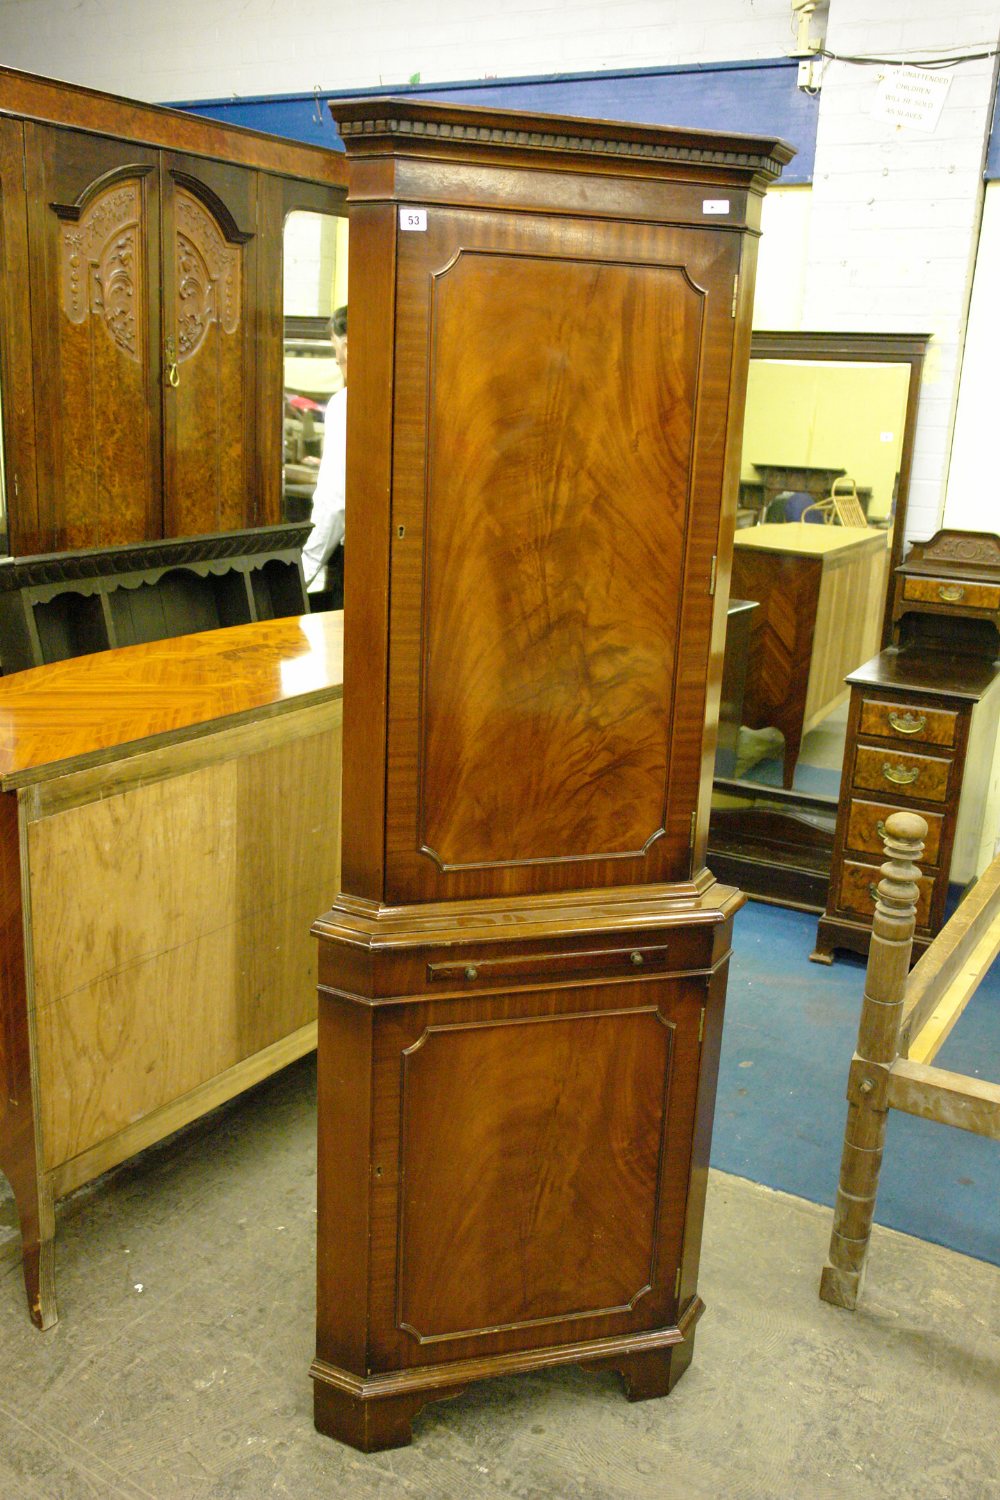 20TH CENTURY MAHOGANY FLOOR STANDING CORNER CUPBOARD WITH DENTIL MOULDED CORNICE 177CM